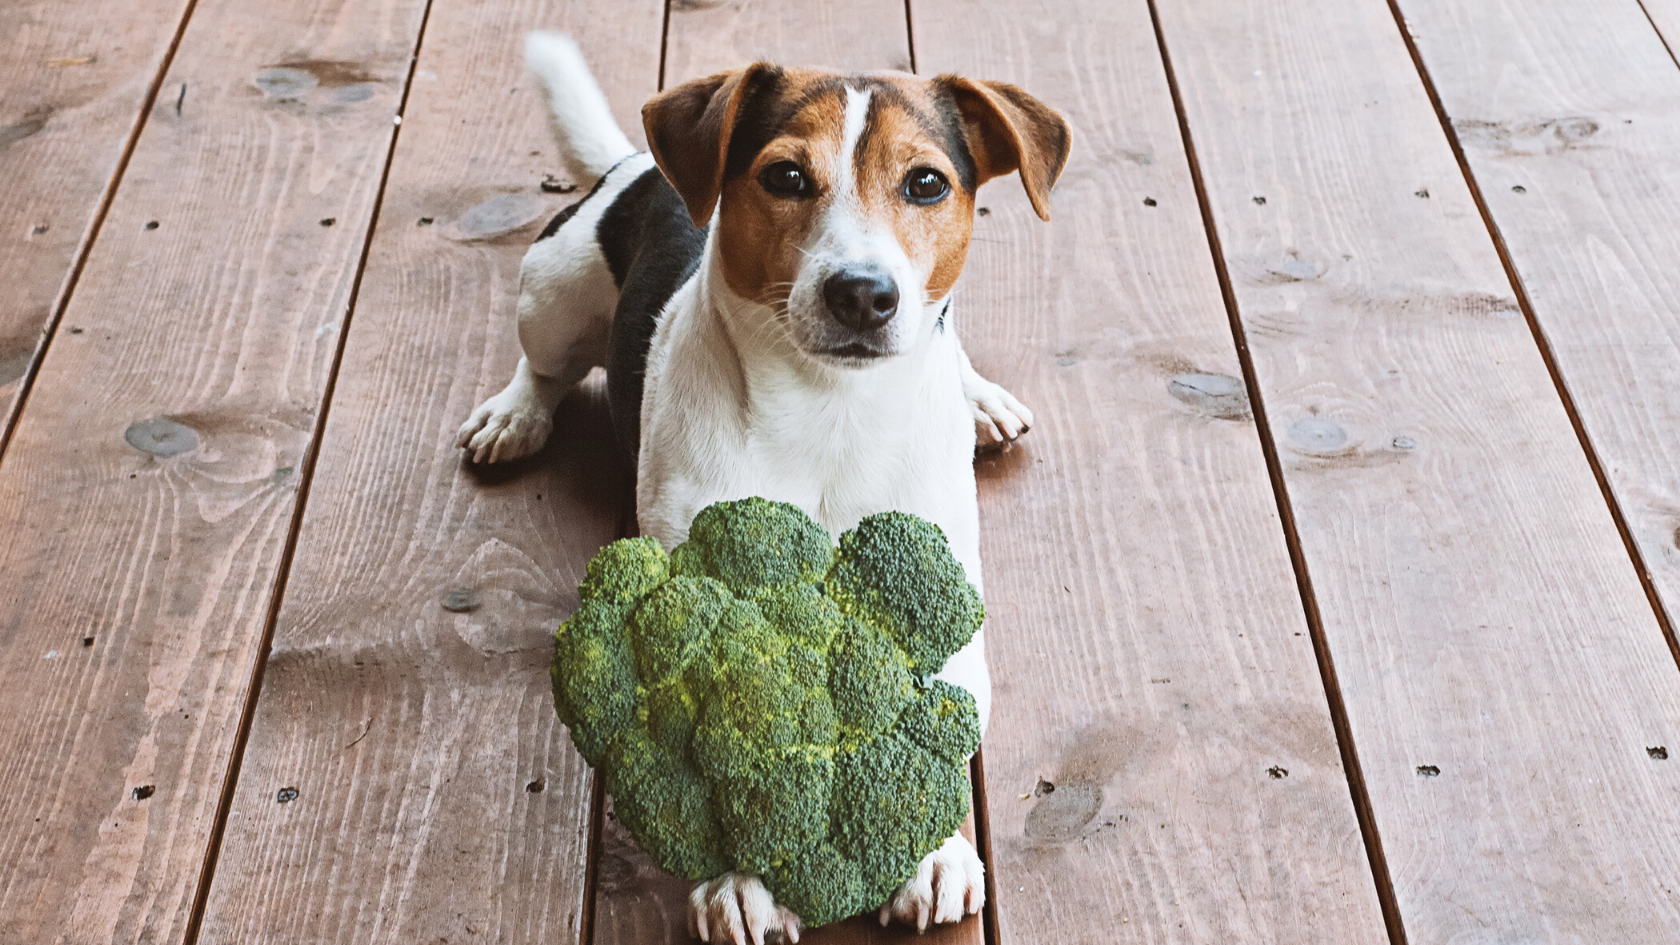 How a Raw Food or BARF Diet Affects Your Dogs Microbiome